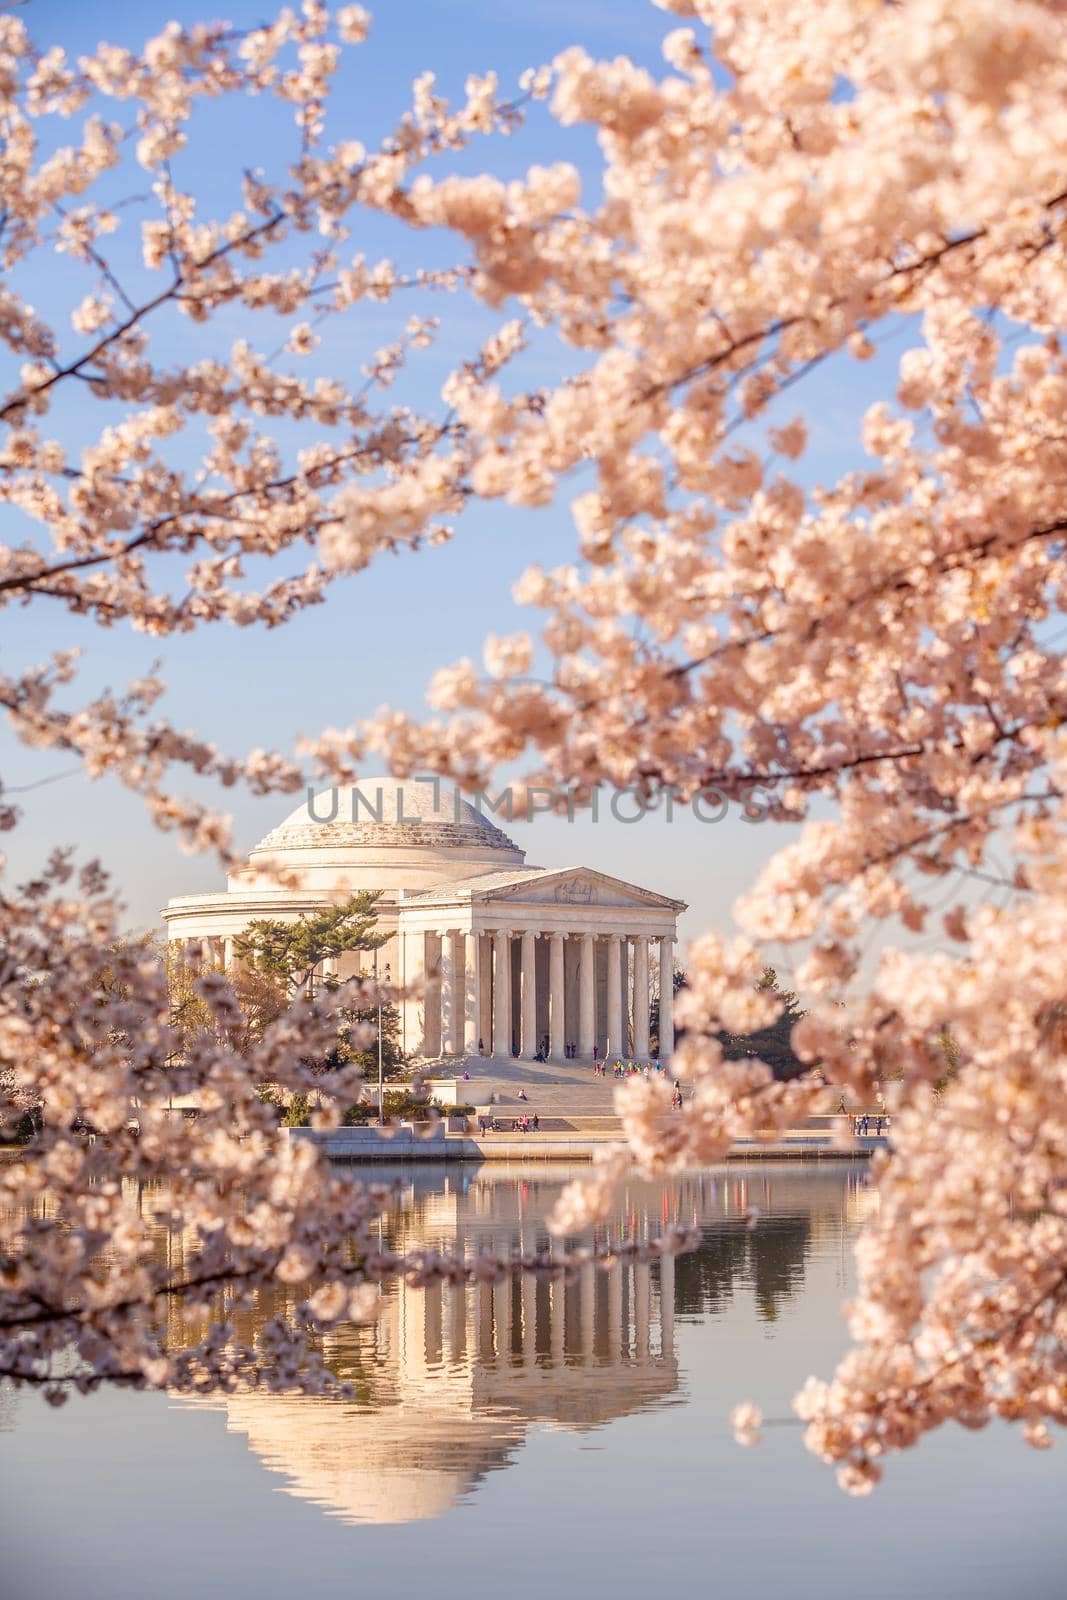 Cherry Blossom Festival in Washington, D.C. in USA by f11photo